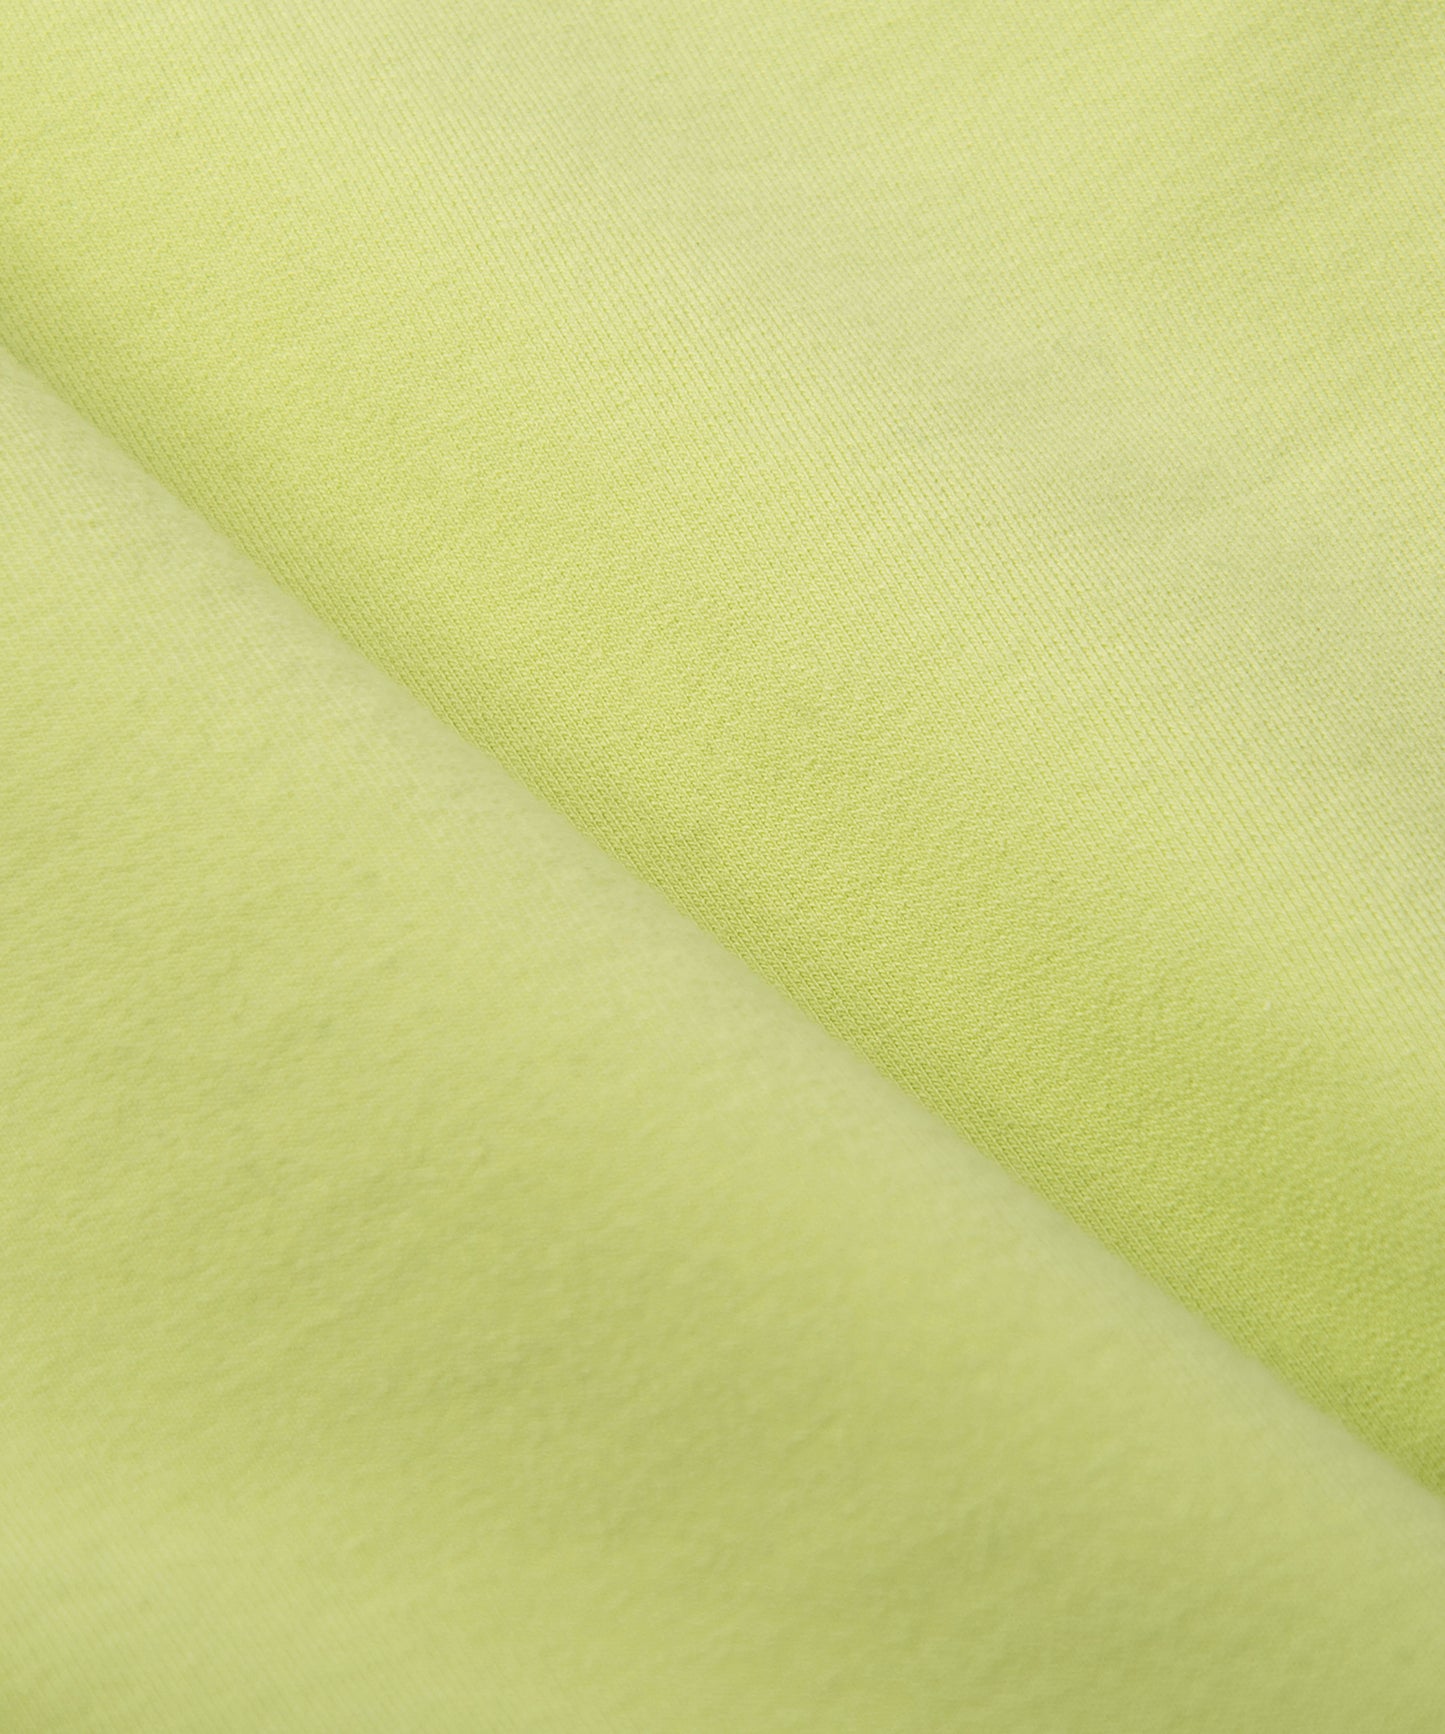 CUSTOM_ALT_TEXT: French terry closeup on Paper Planes Gusset Short color Lime Sherbet.